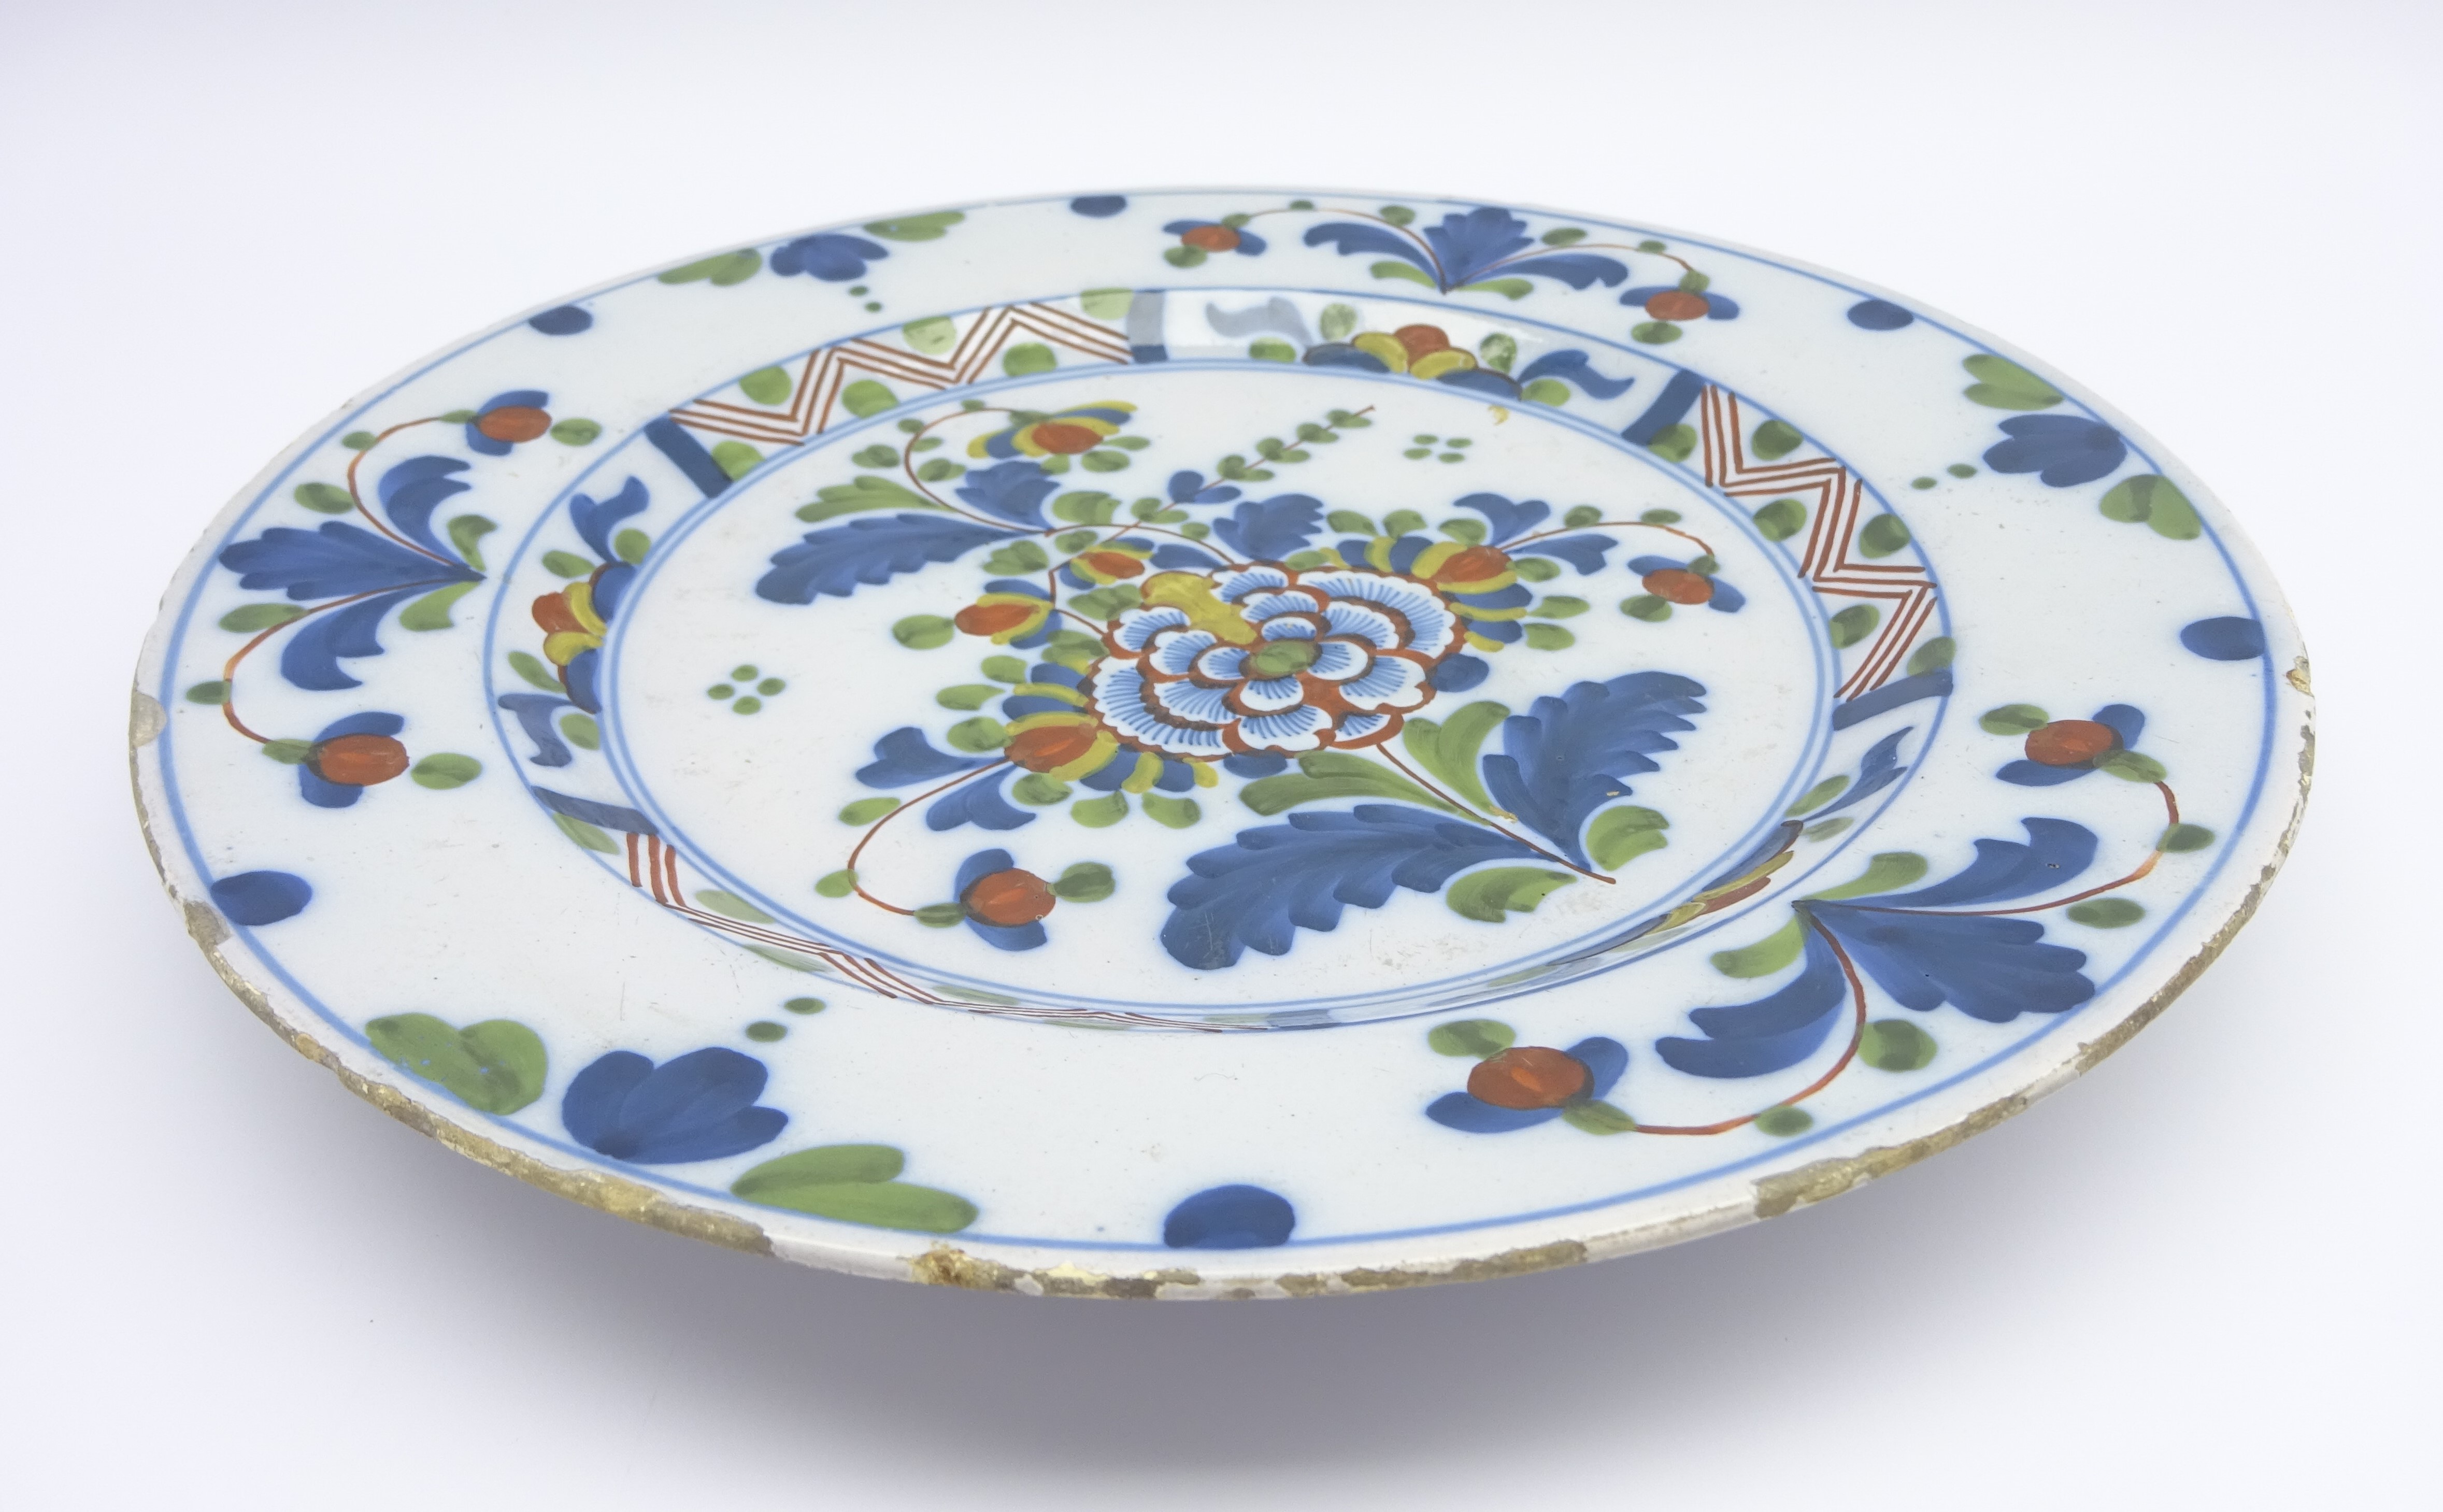 18th Century English Delft plate decorated with stylised flowers in blue, green and red, - Image 2 of 3